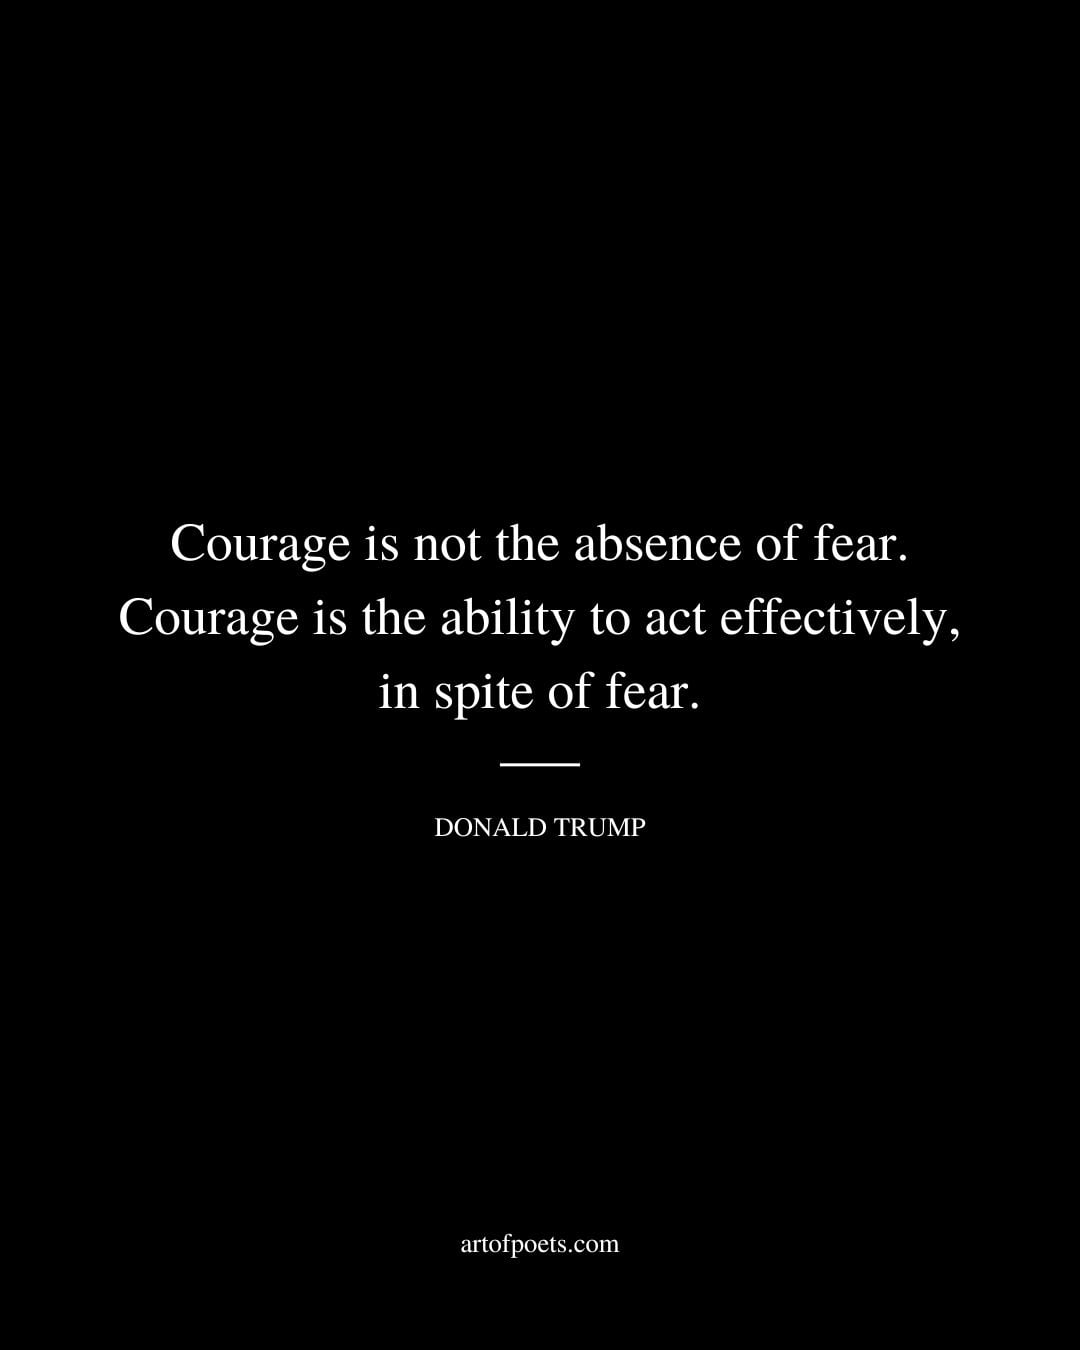 Courage is not the absence of fear. Courage is the ability to act effectively in spite of fear